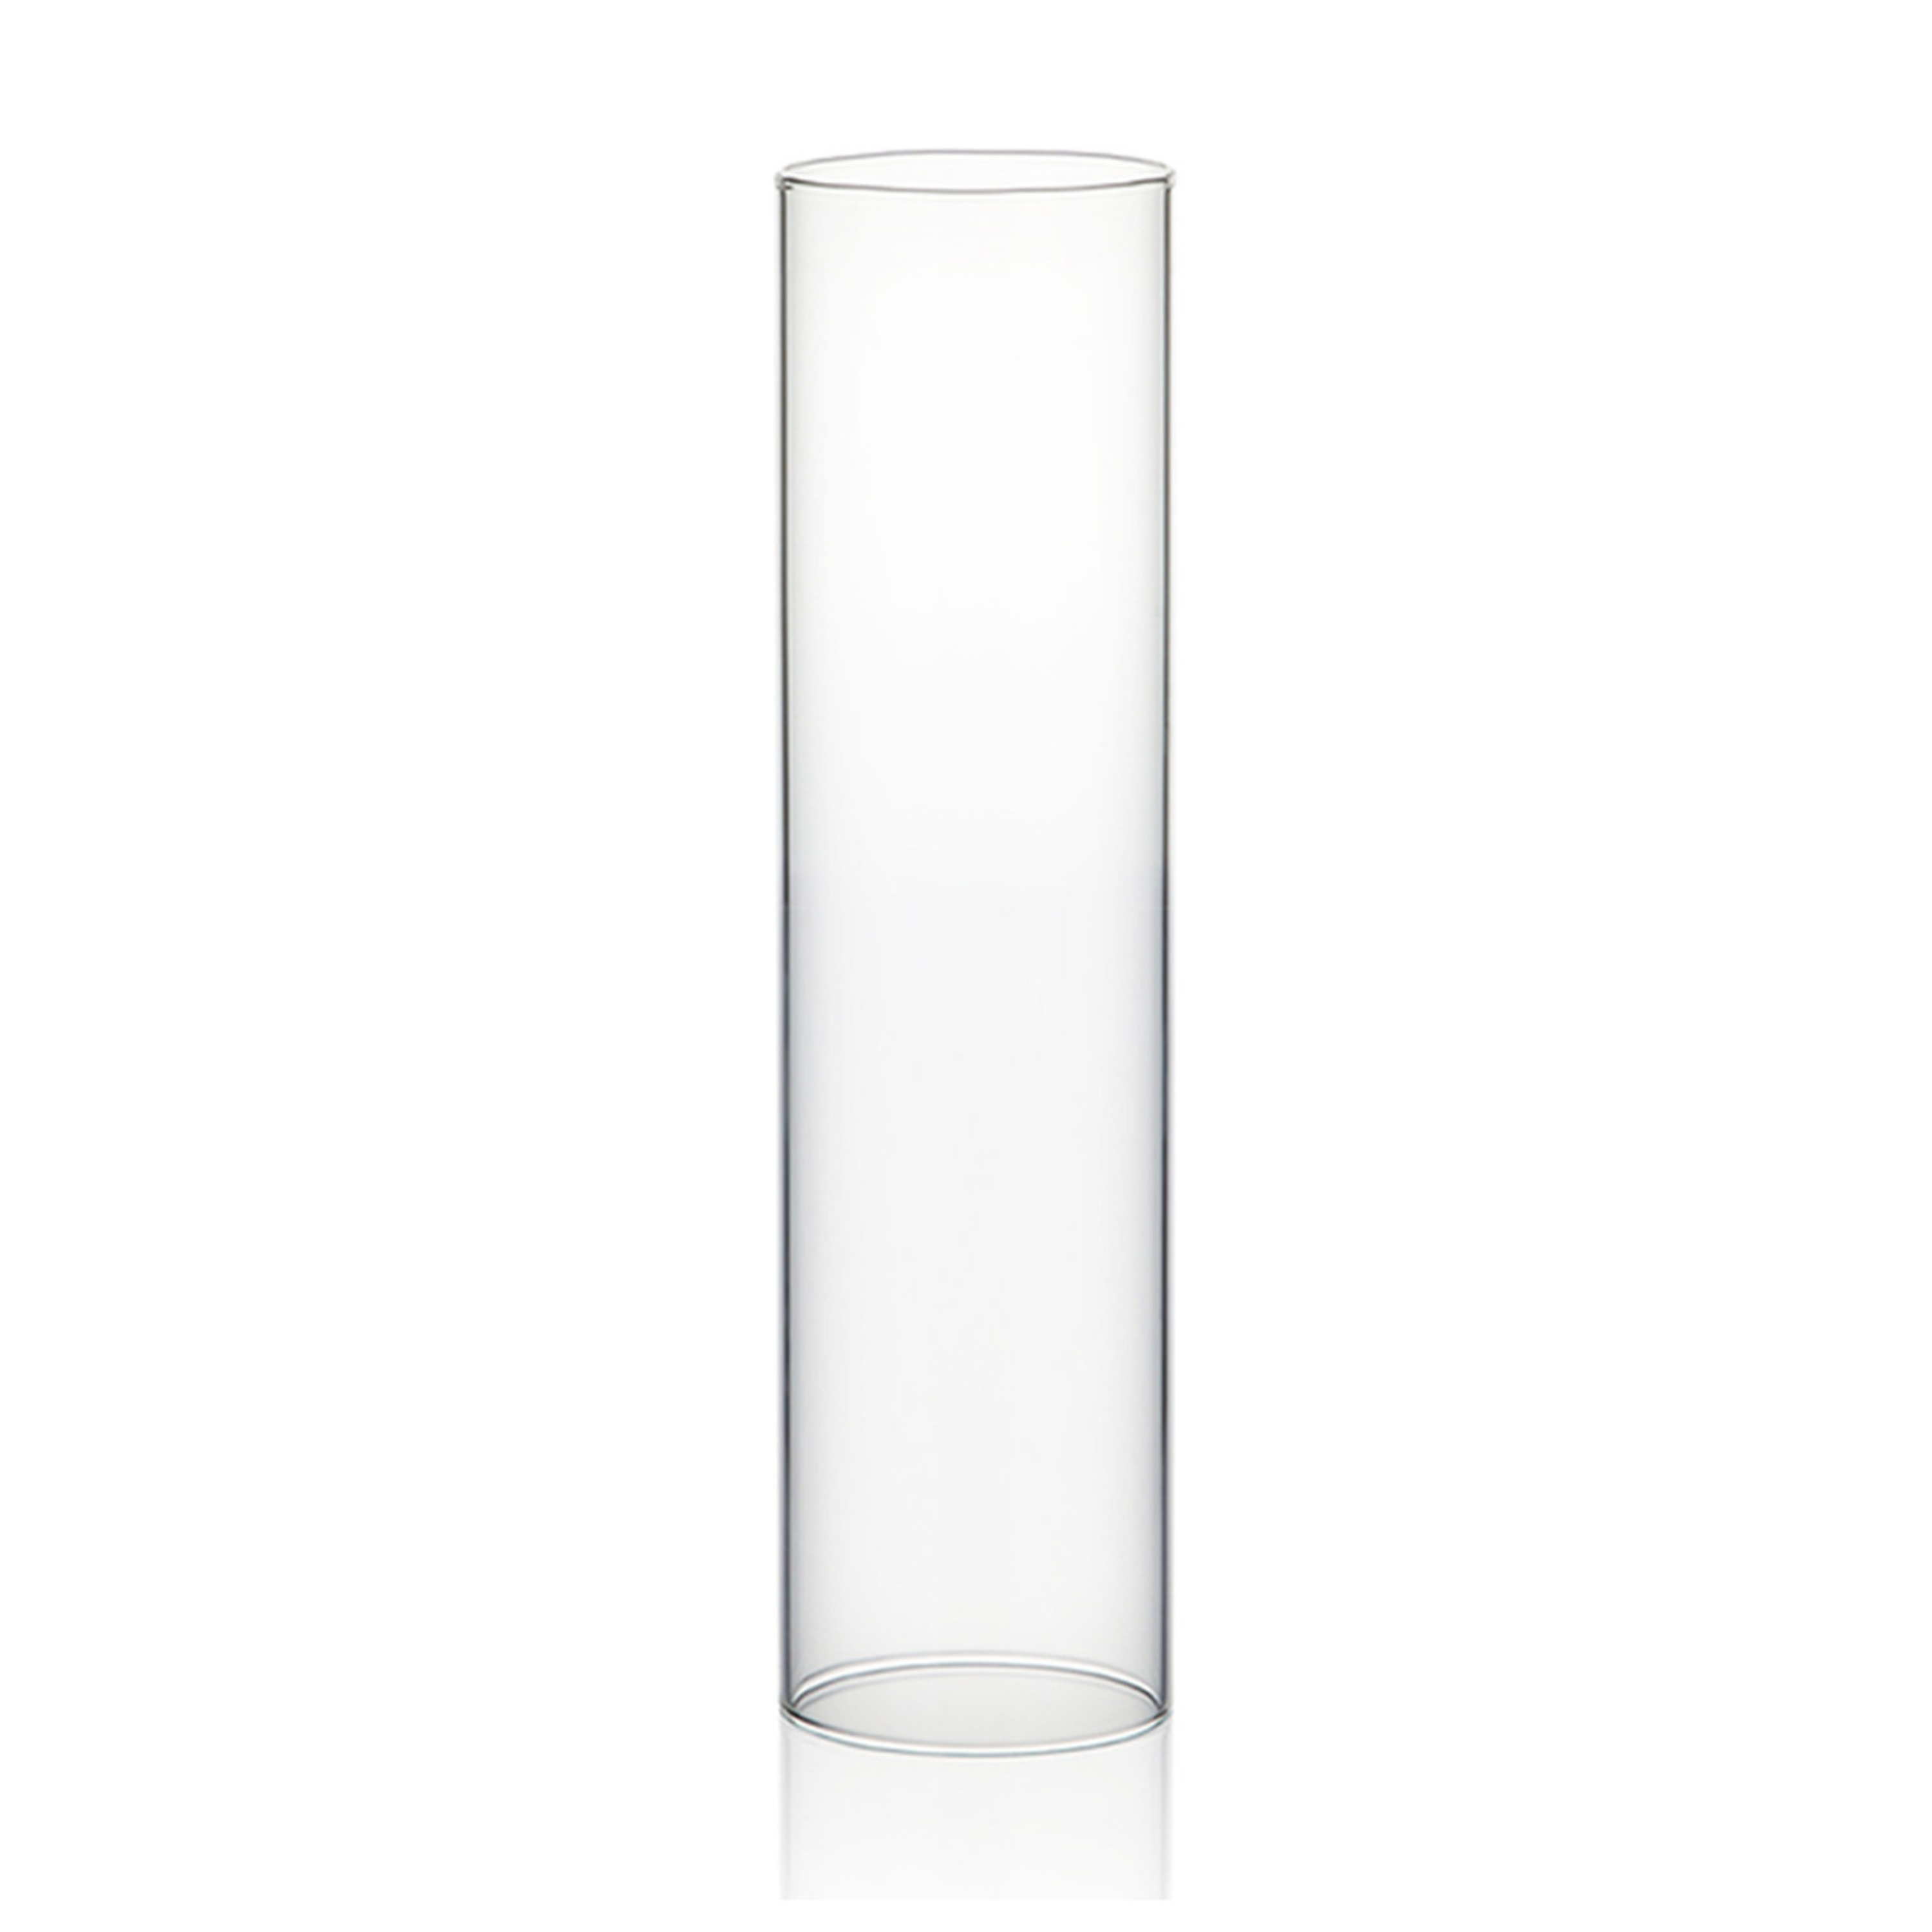 Hurricane Candle Holder Shade, Wide 2.5", Height 10", Clear Glass Cylinder Candleholder, Chimney Tube, Open Ended Candle Shade, 42 Pcs bulk per case